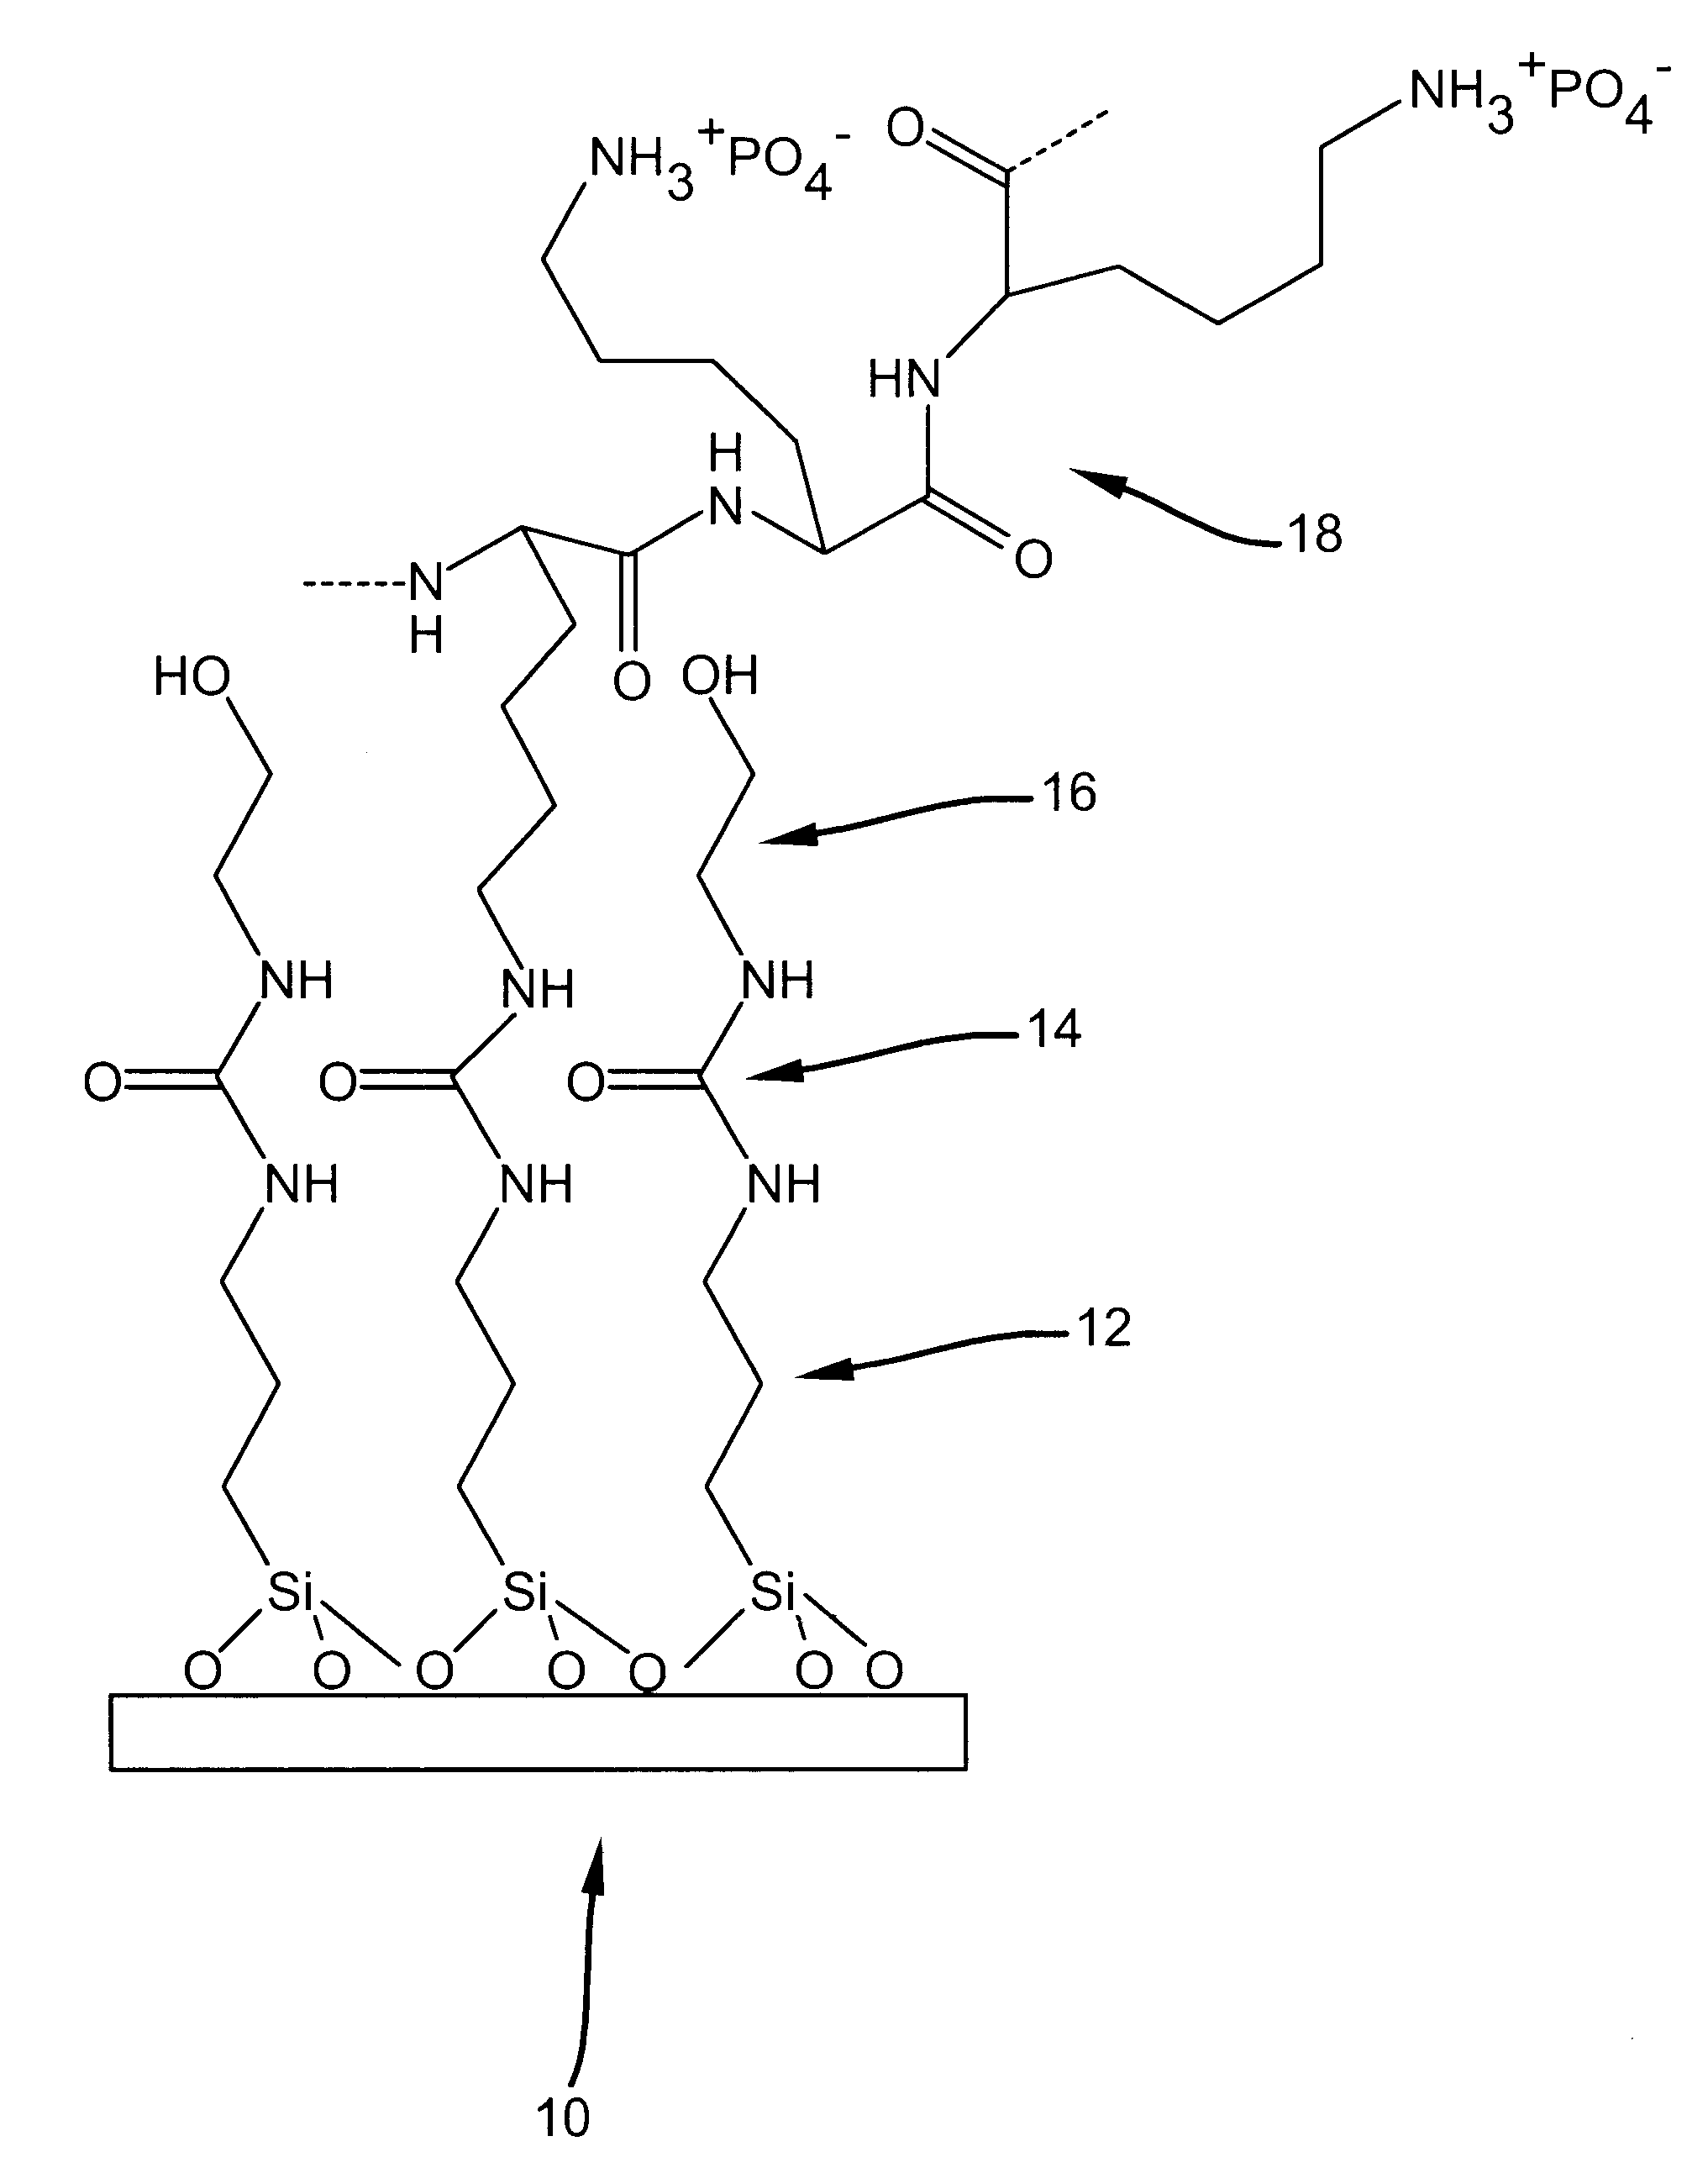 Polymer support for DNA immobilization